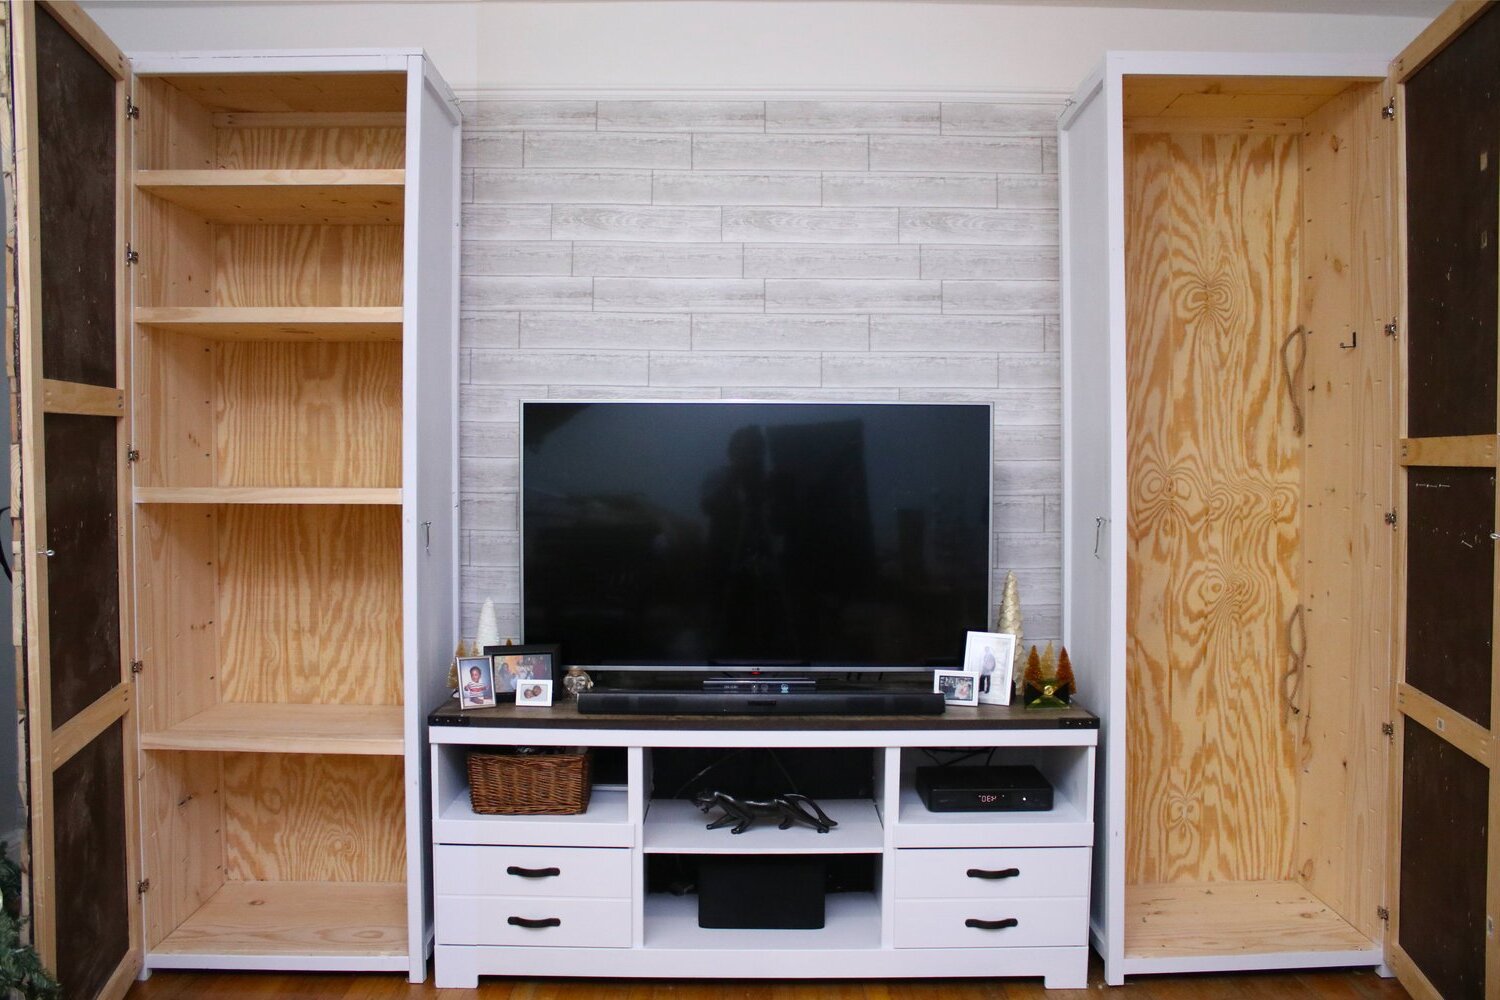 DIY Tall Cabinet Plans: Step-by-Step Guide To Building A Spacious Storage Solution